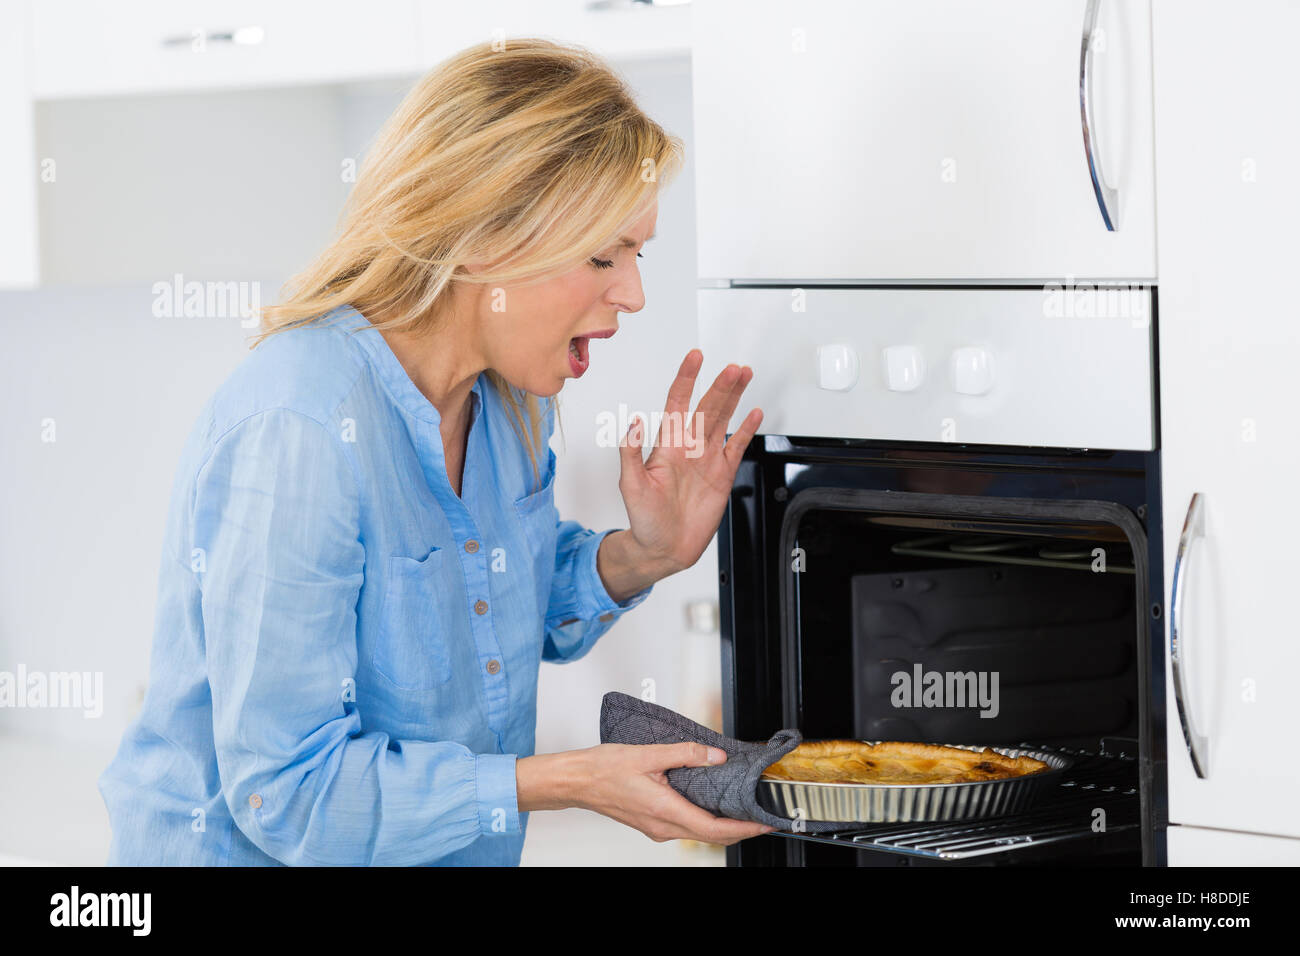 kitchen burn on hand caused by heating oven Stock Photo